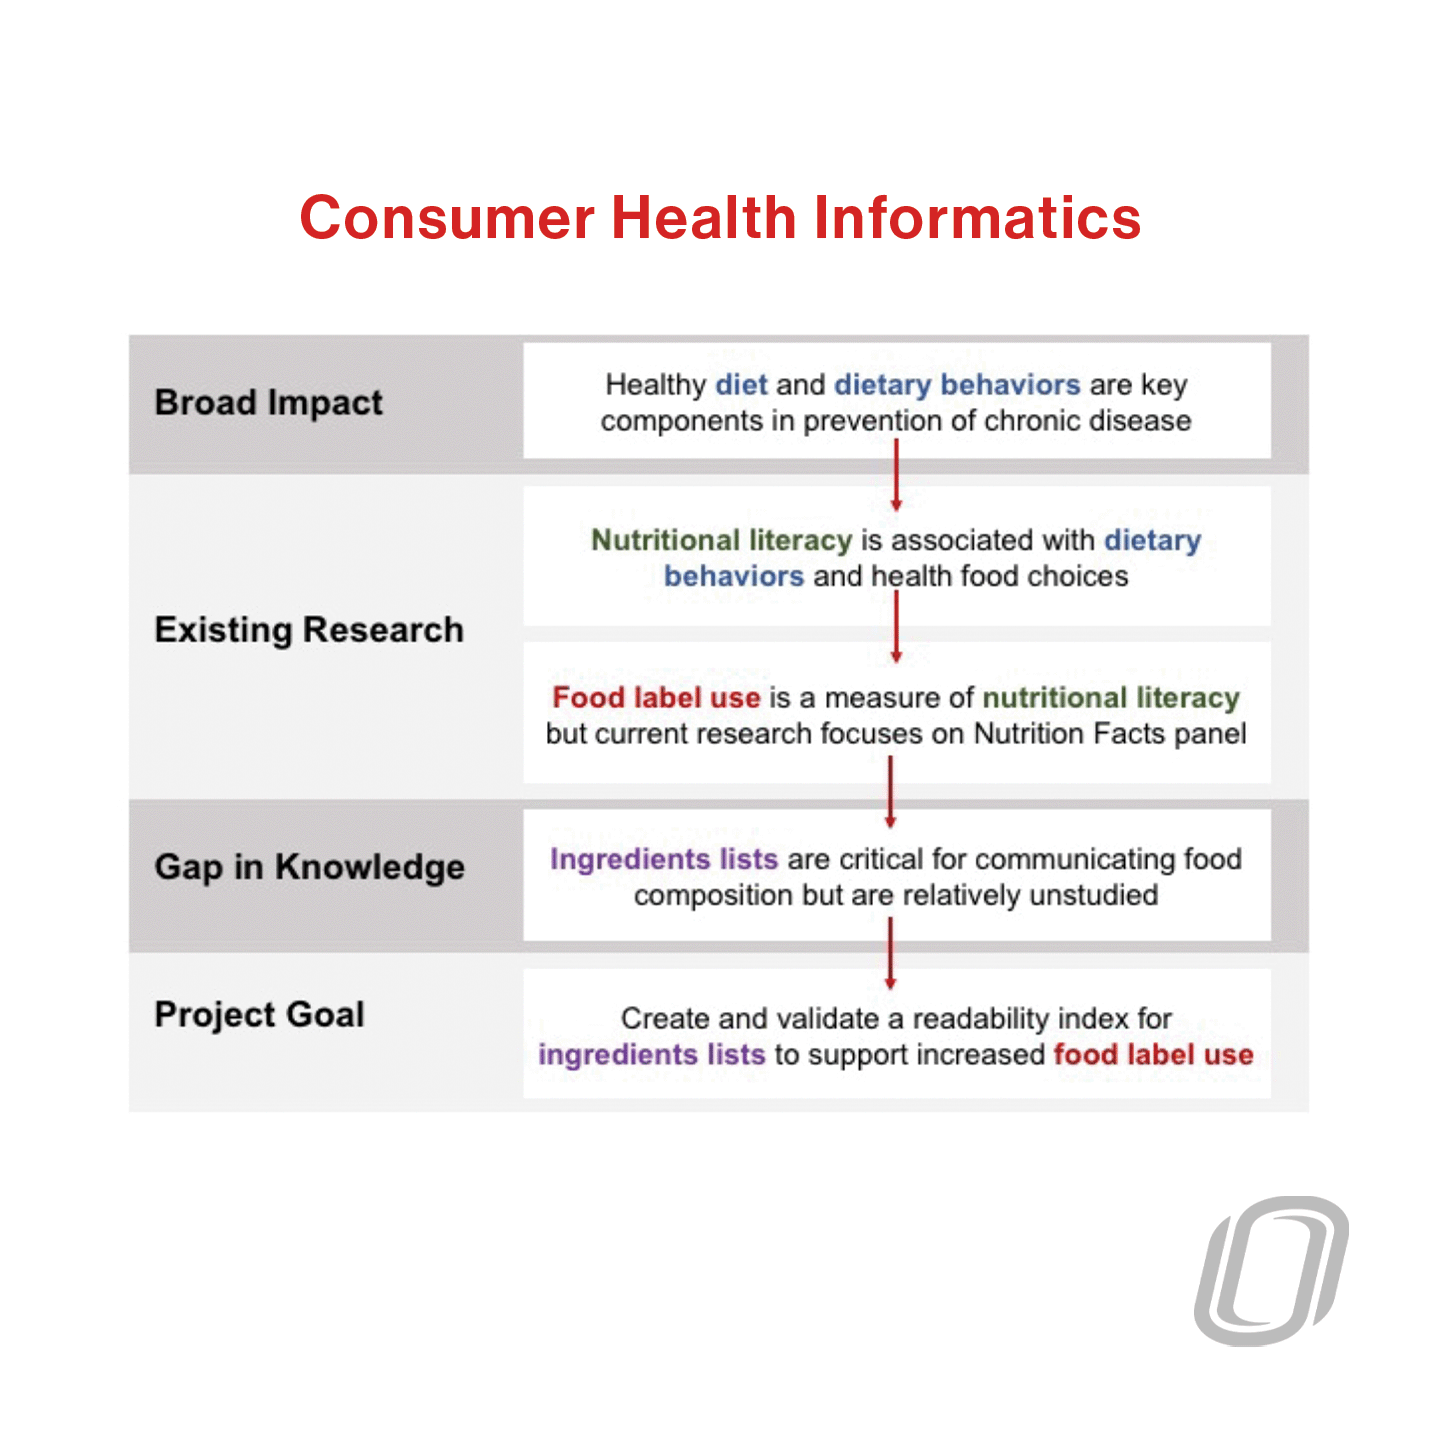 a top-down diagram overview that shows the consumer health informatics processes